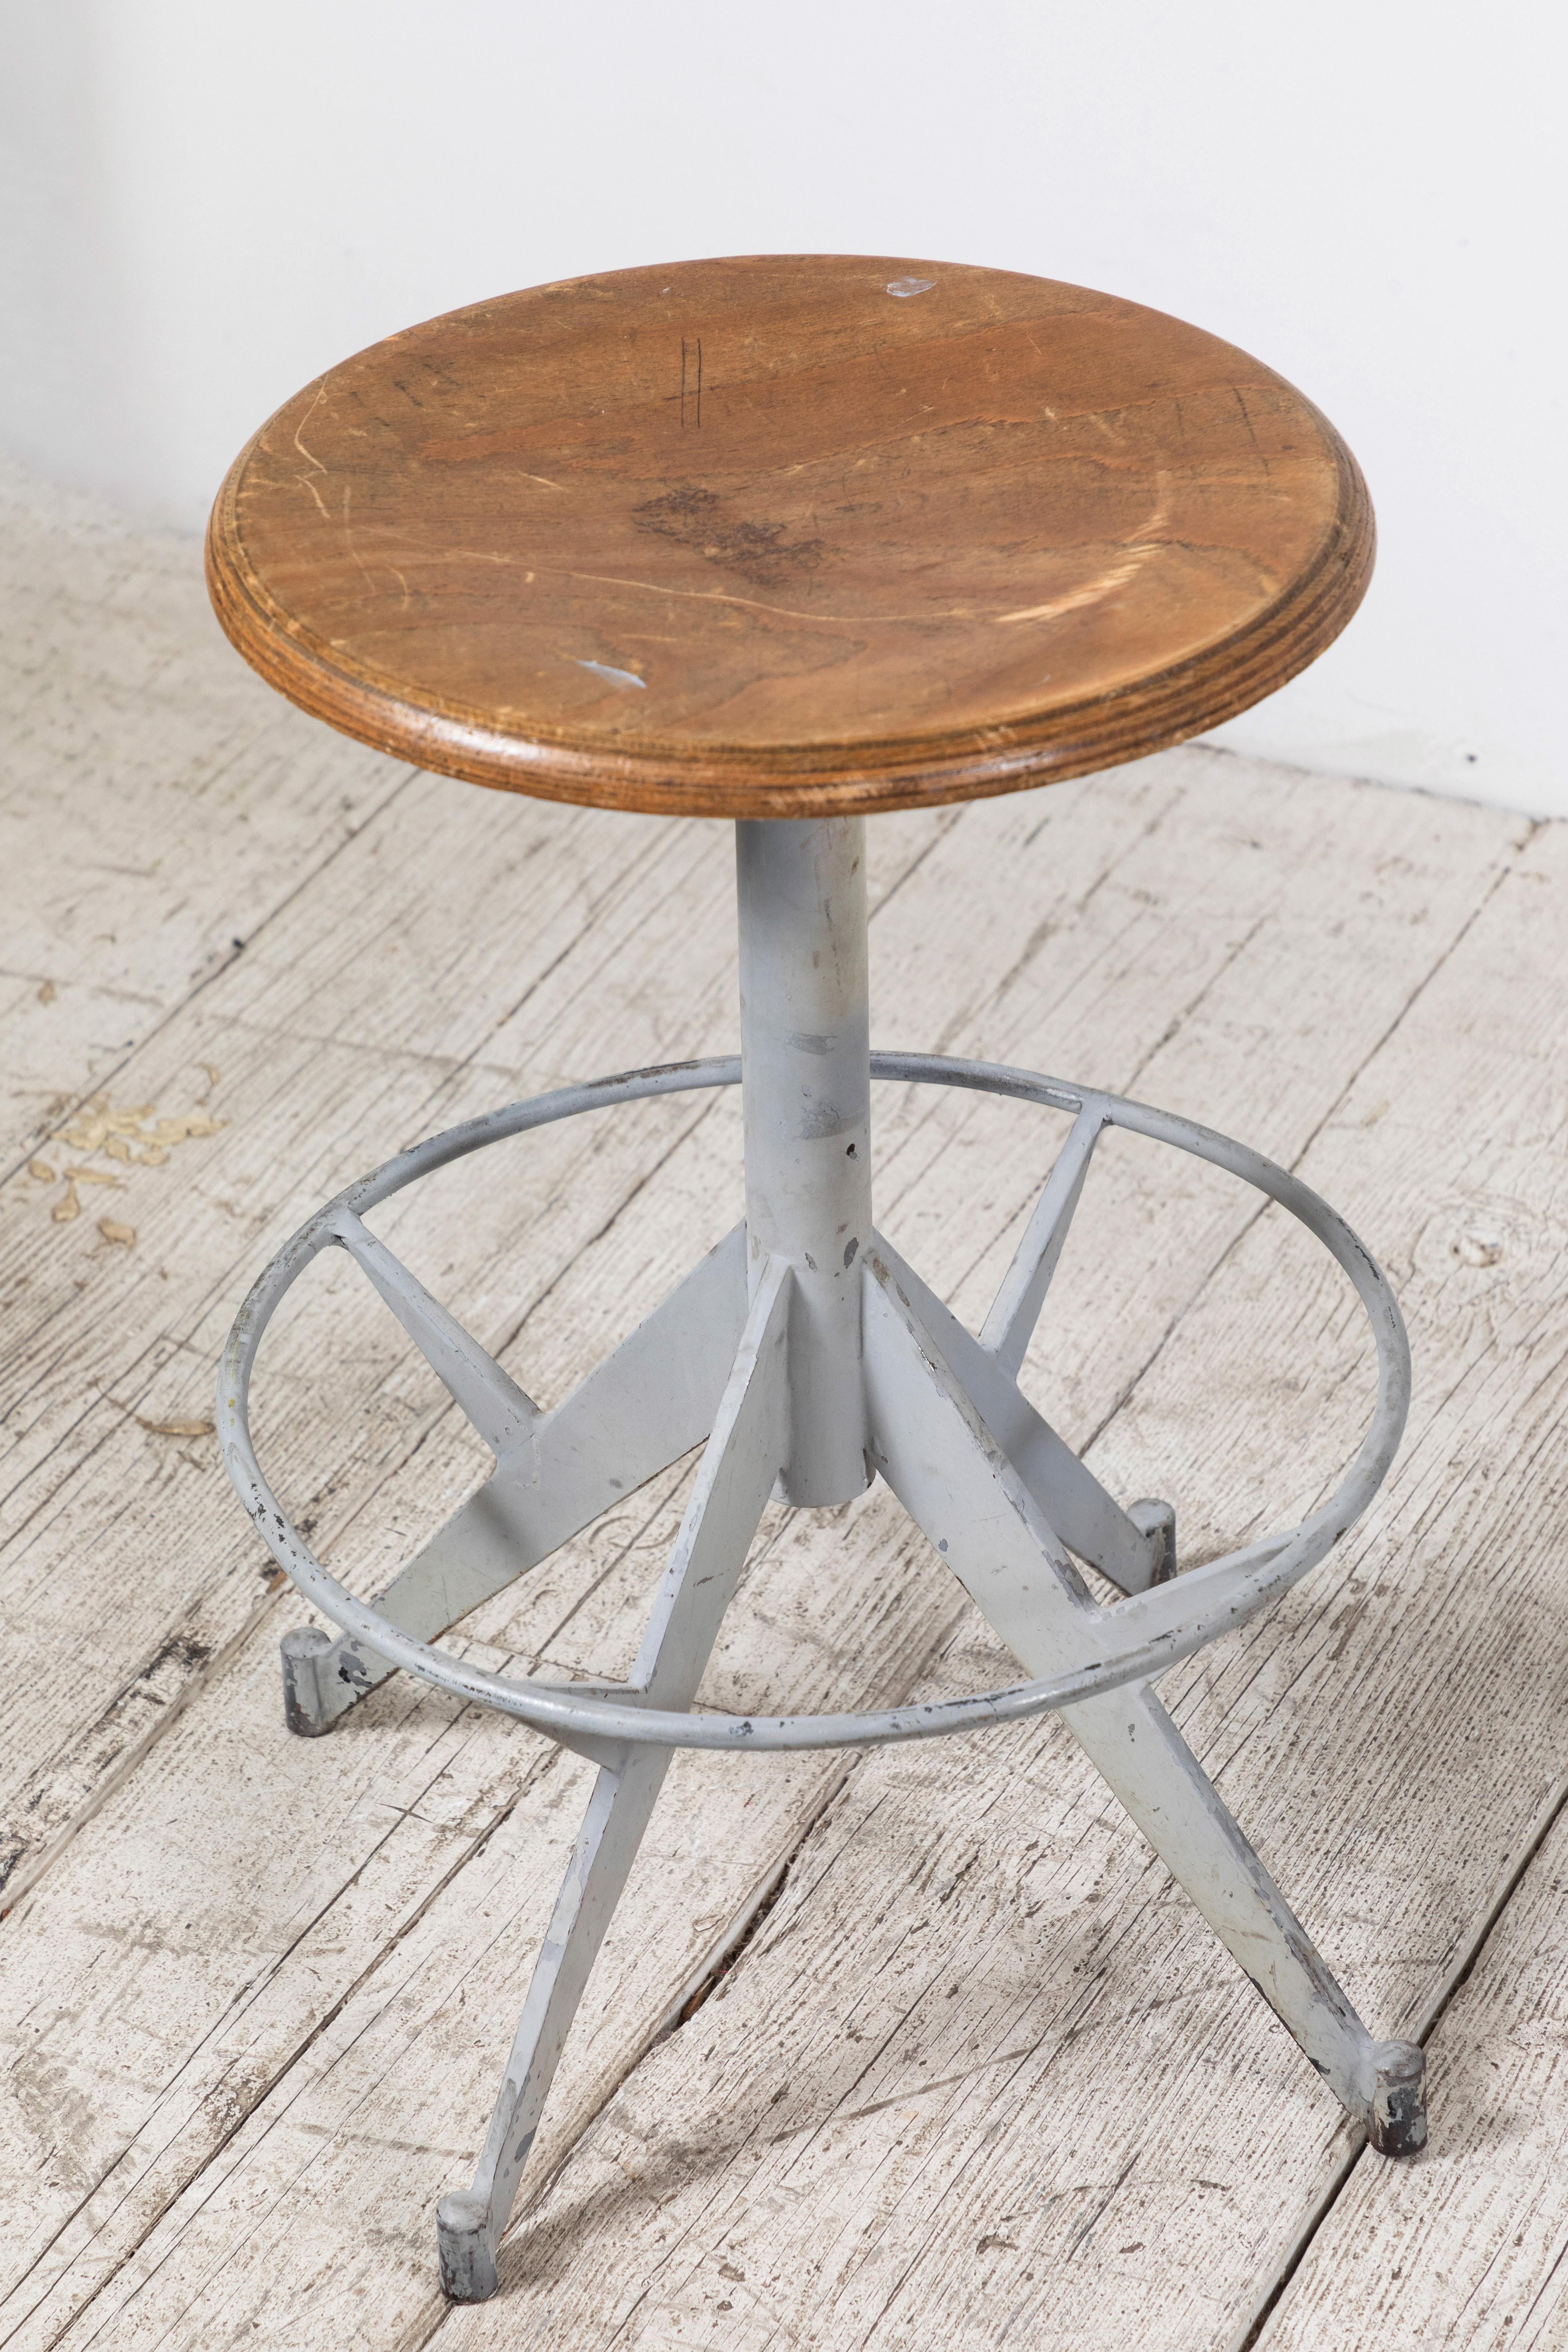 Mid-20th Century French Metal and Wood Industrial Swivel Stool